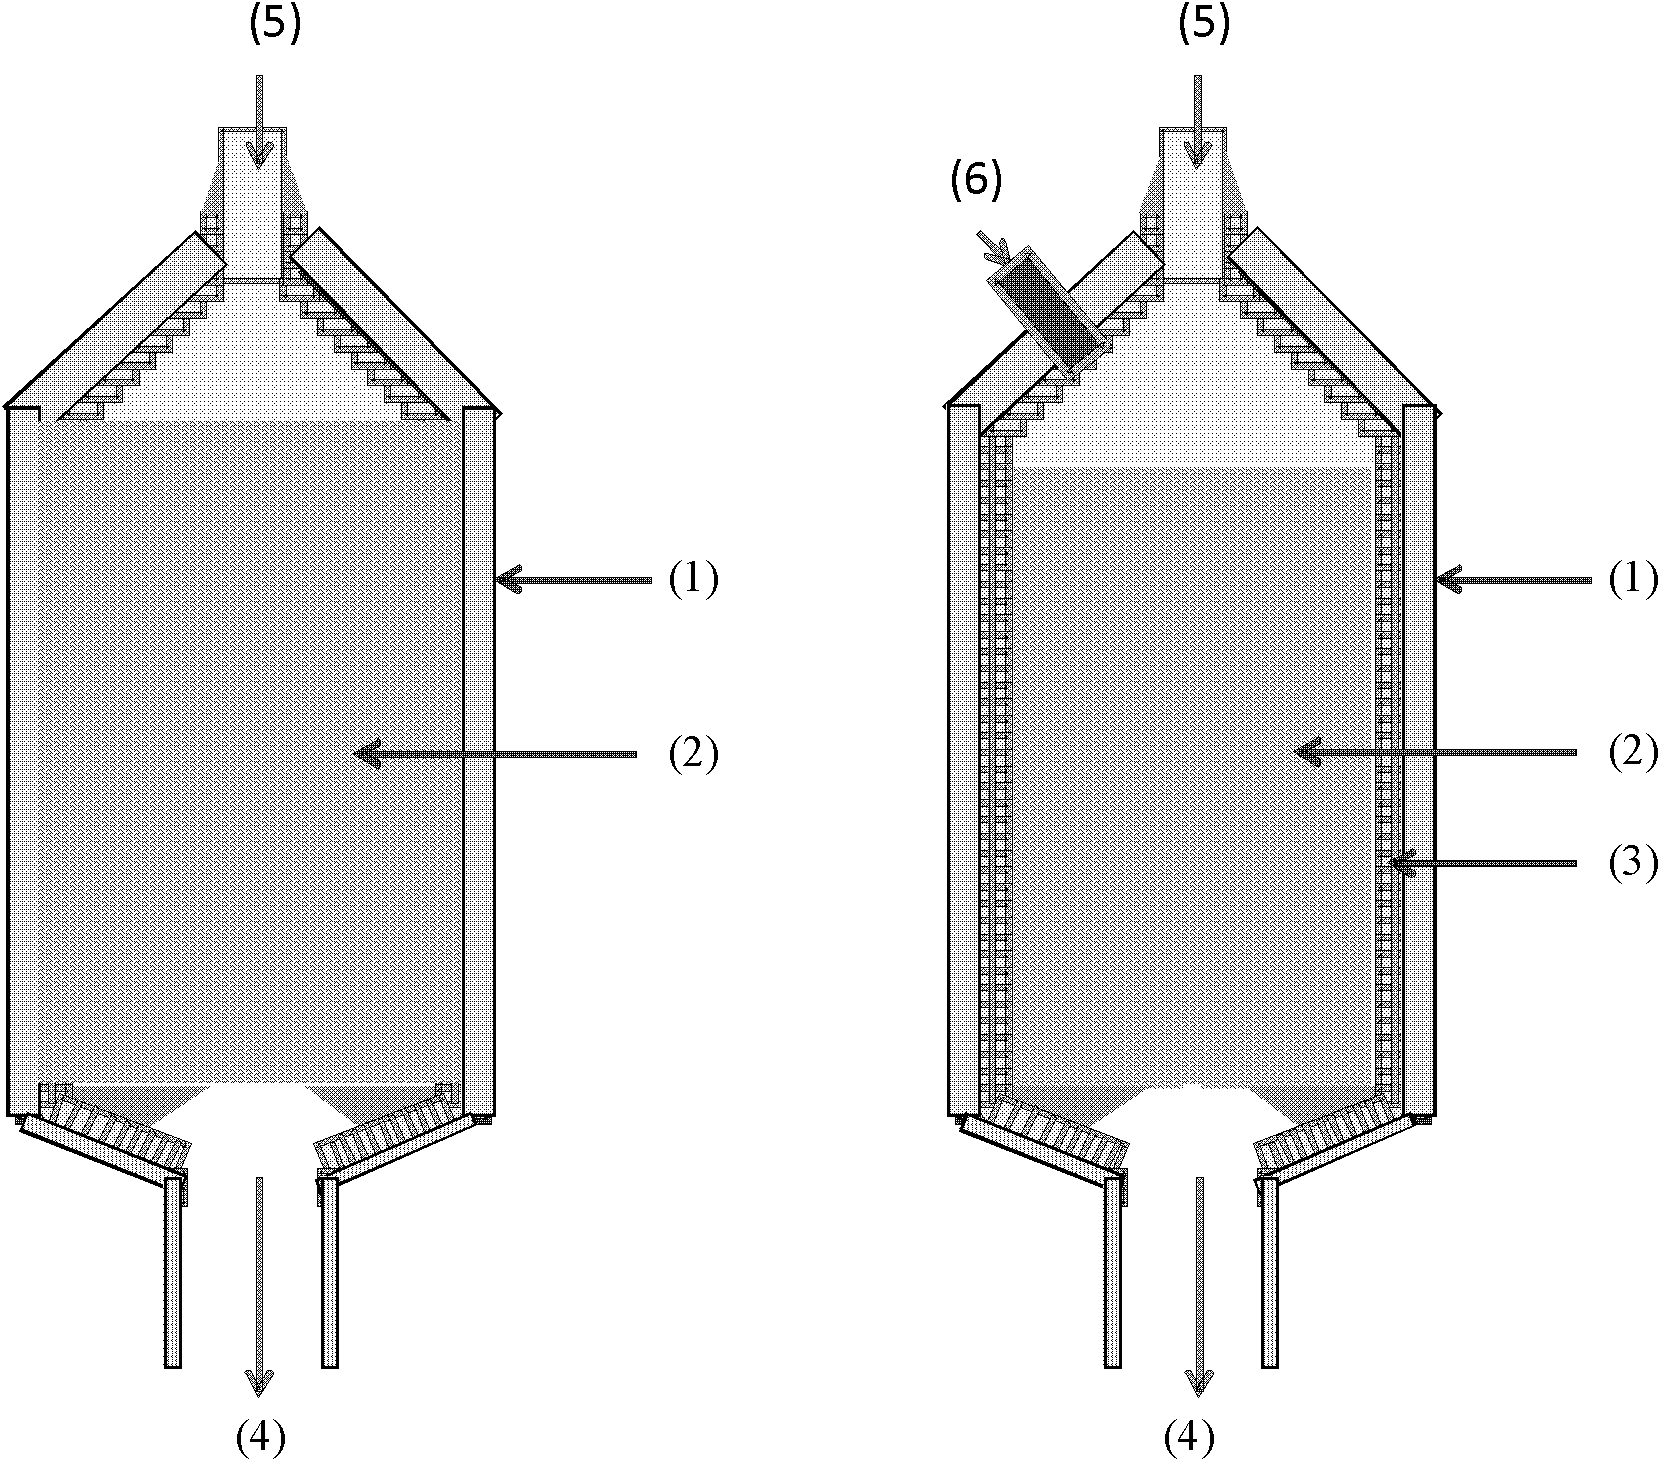 Silicon carbide micro-channel reactor and application thereof in preparing low carbon olefin from hydrocarbons cracking